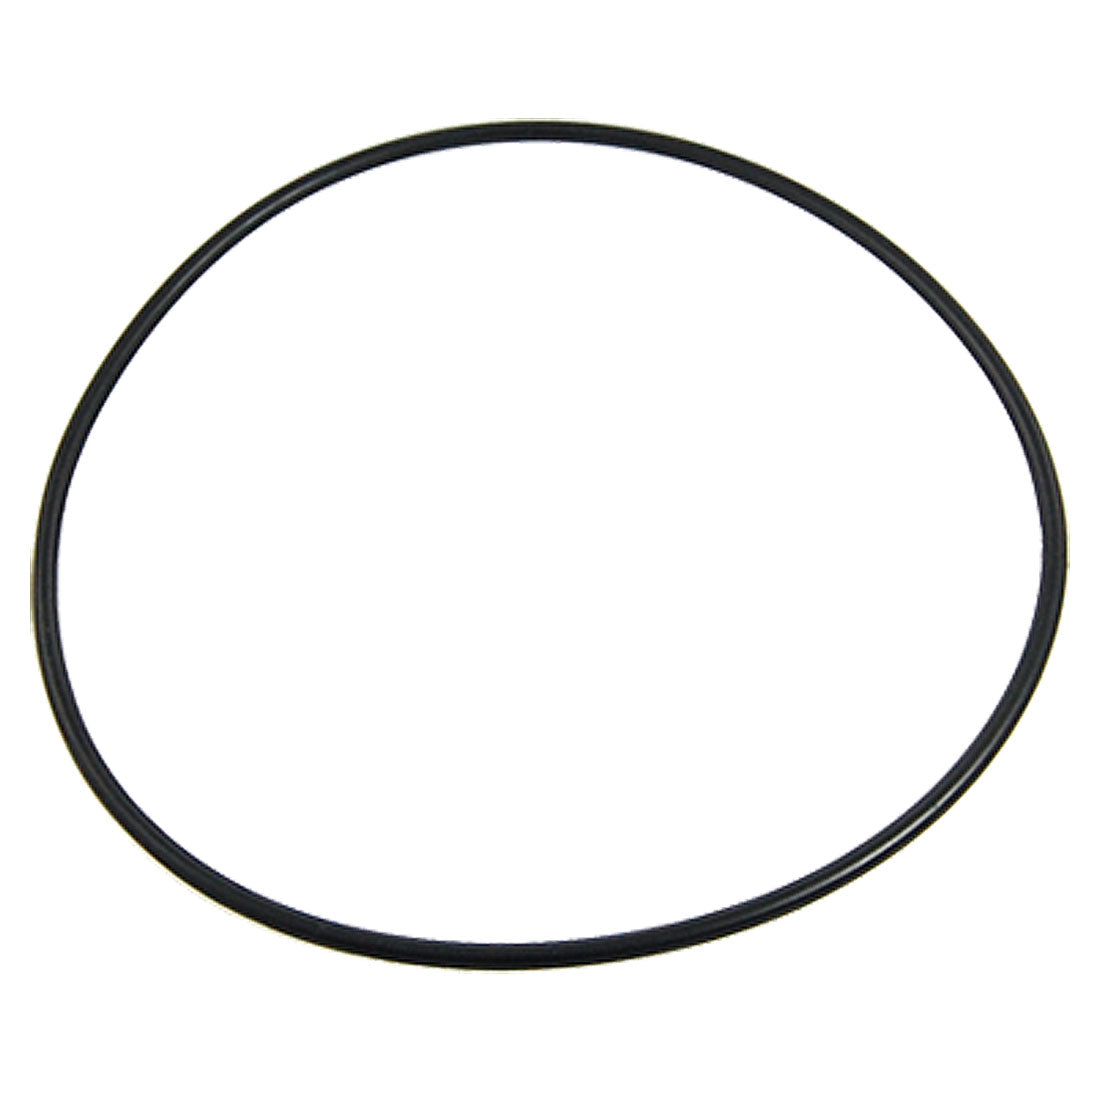 uxcell Uxcell 135mm x 3.5mm Rubber O-ring Oil Seal Sealing Ring Gasket Black